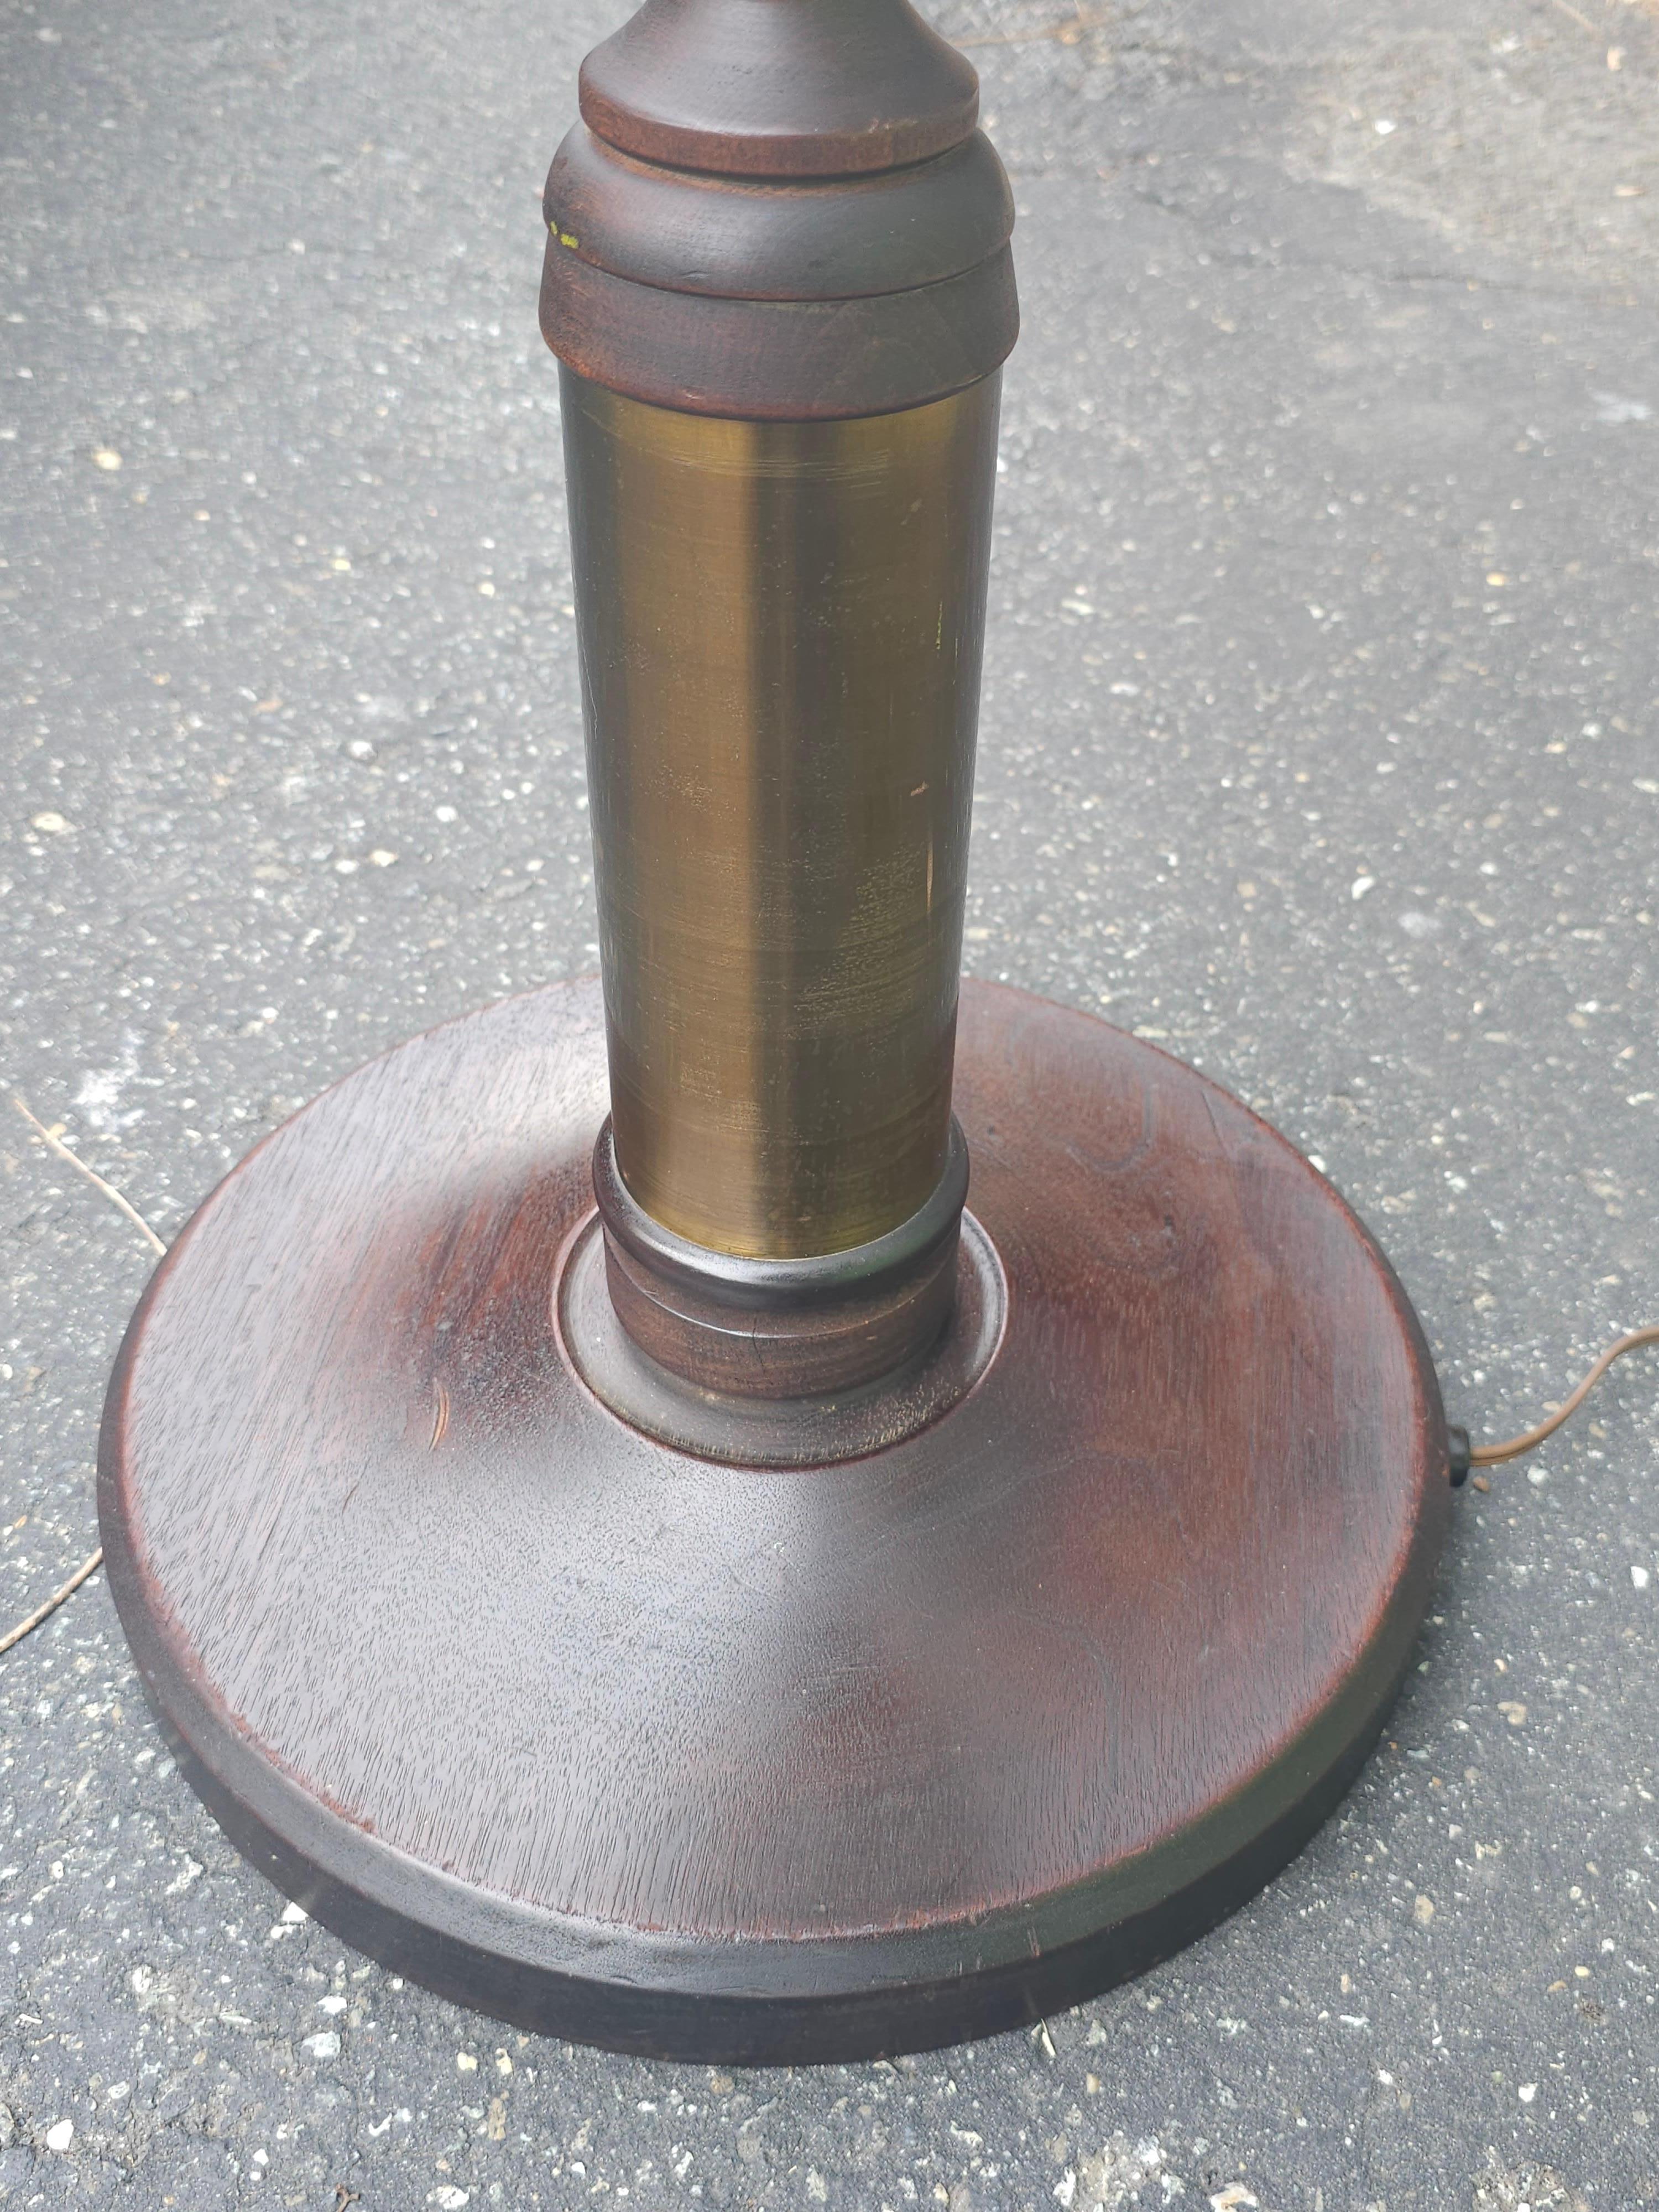 American Mid-20th Century Mahogany and Brass Inset Dual Lights Floor Lamp For Sale